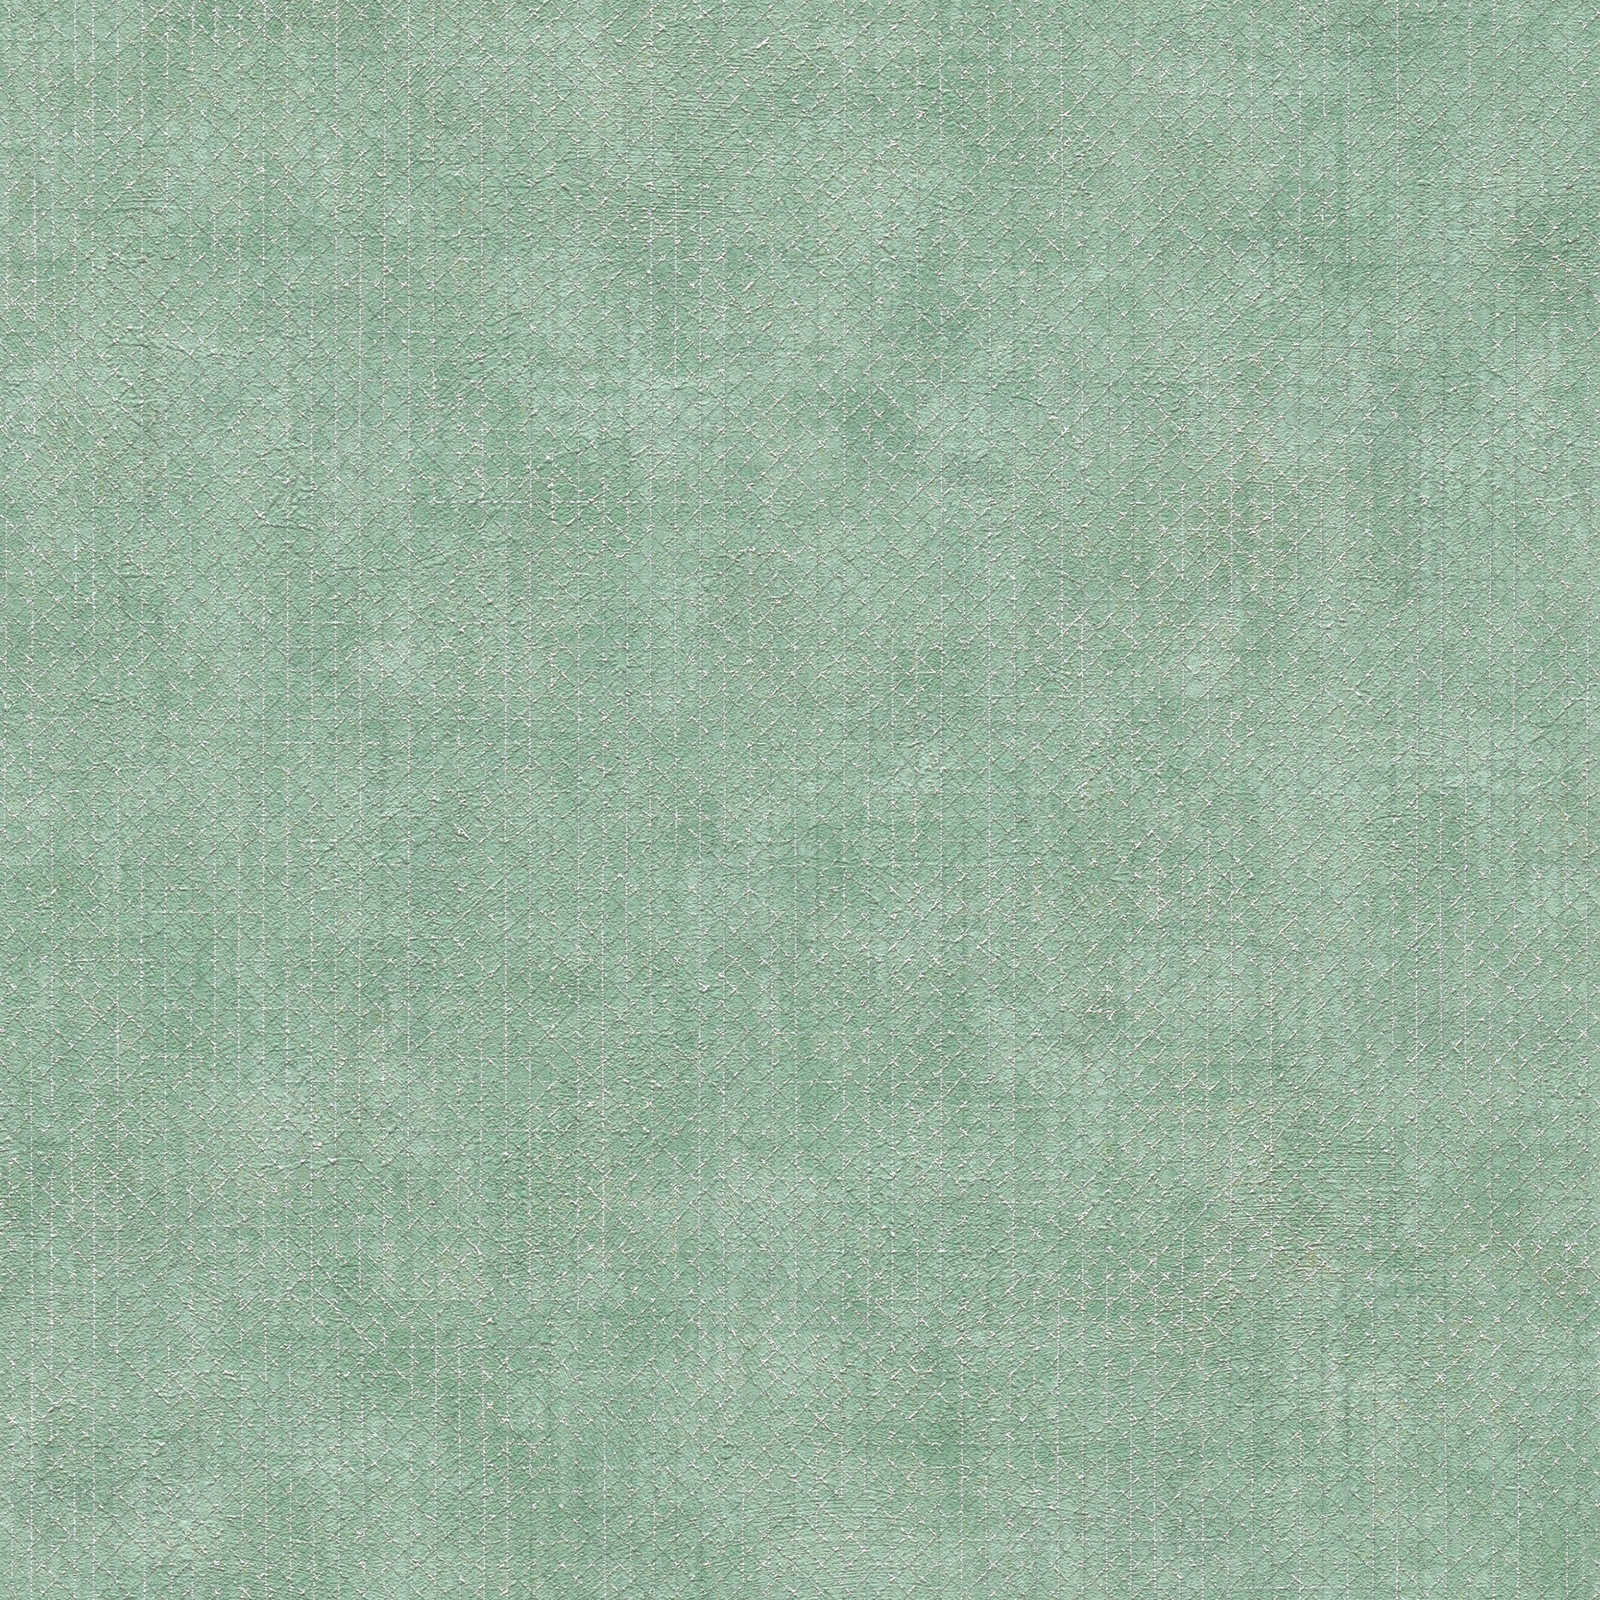 The Bos - Mottled Metallic Lines bold wallpaper AS Creation Roll Green  388264